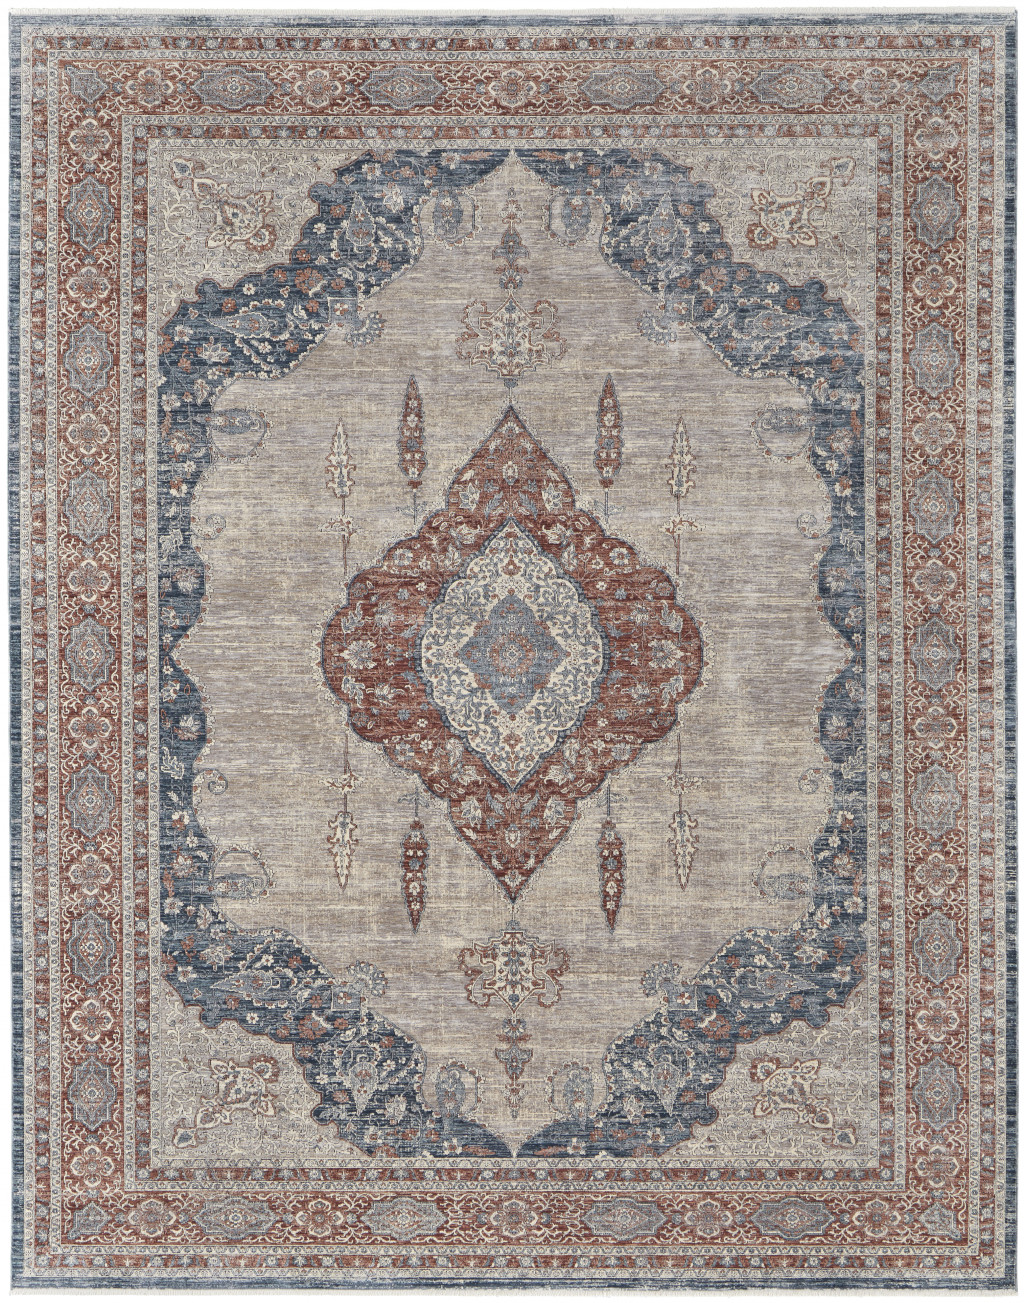 7' X 10' Gray Red And Blue Floral Power Loom Stain Resistant Area Rug-514457-1